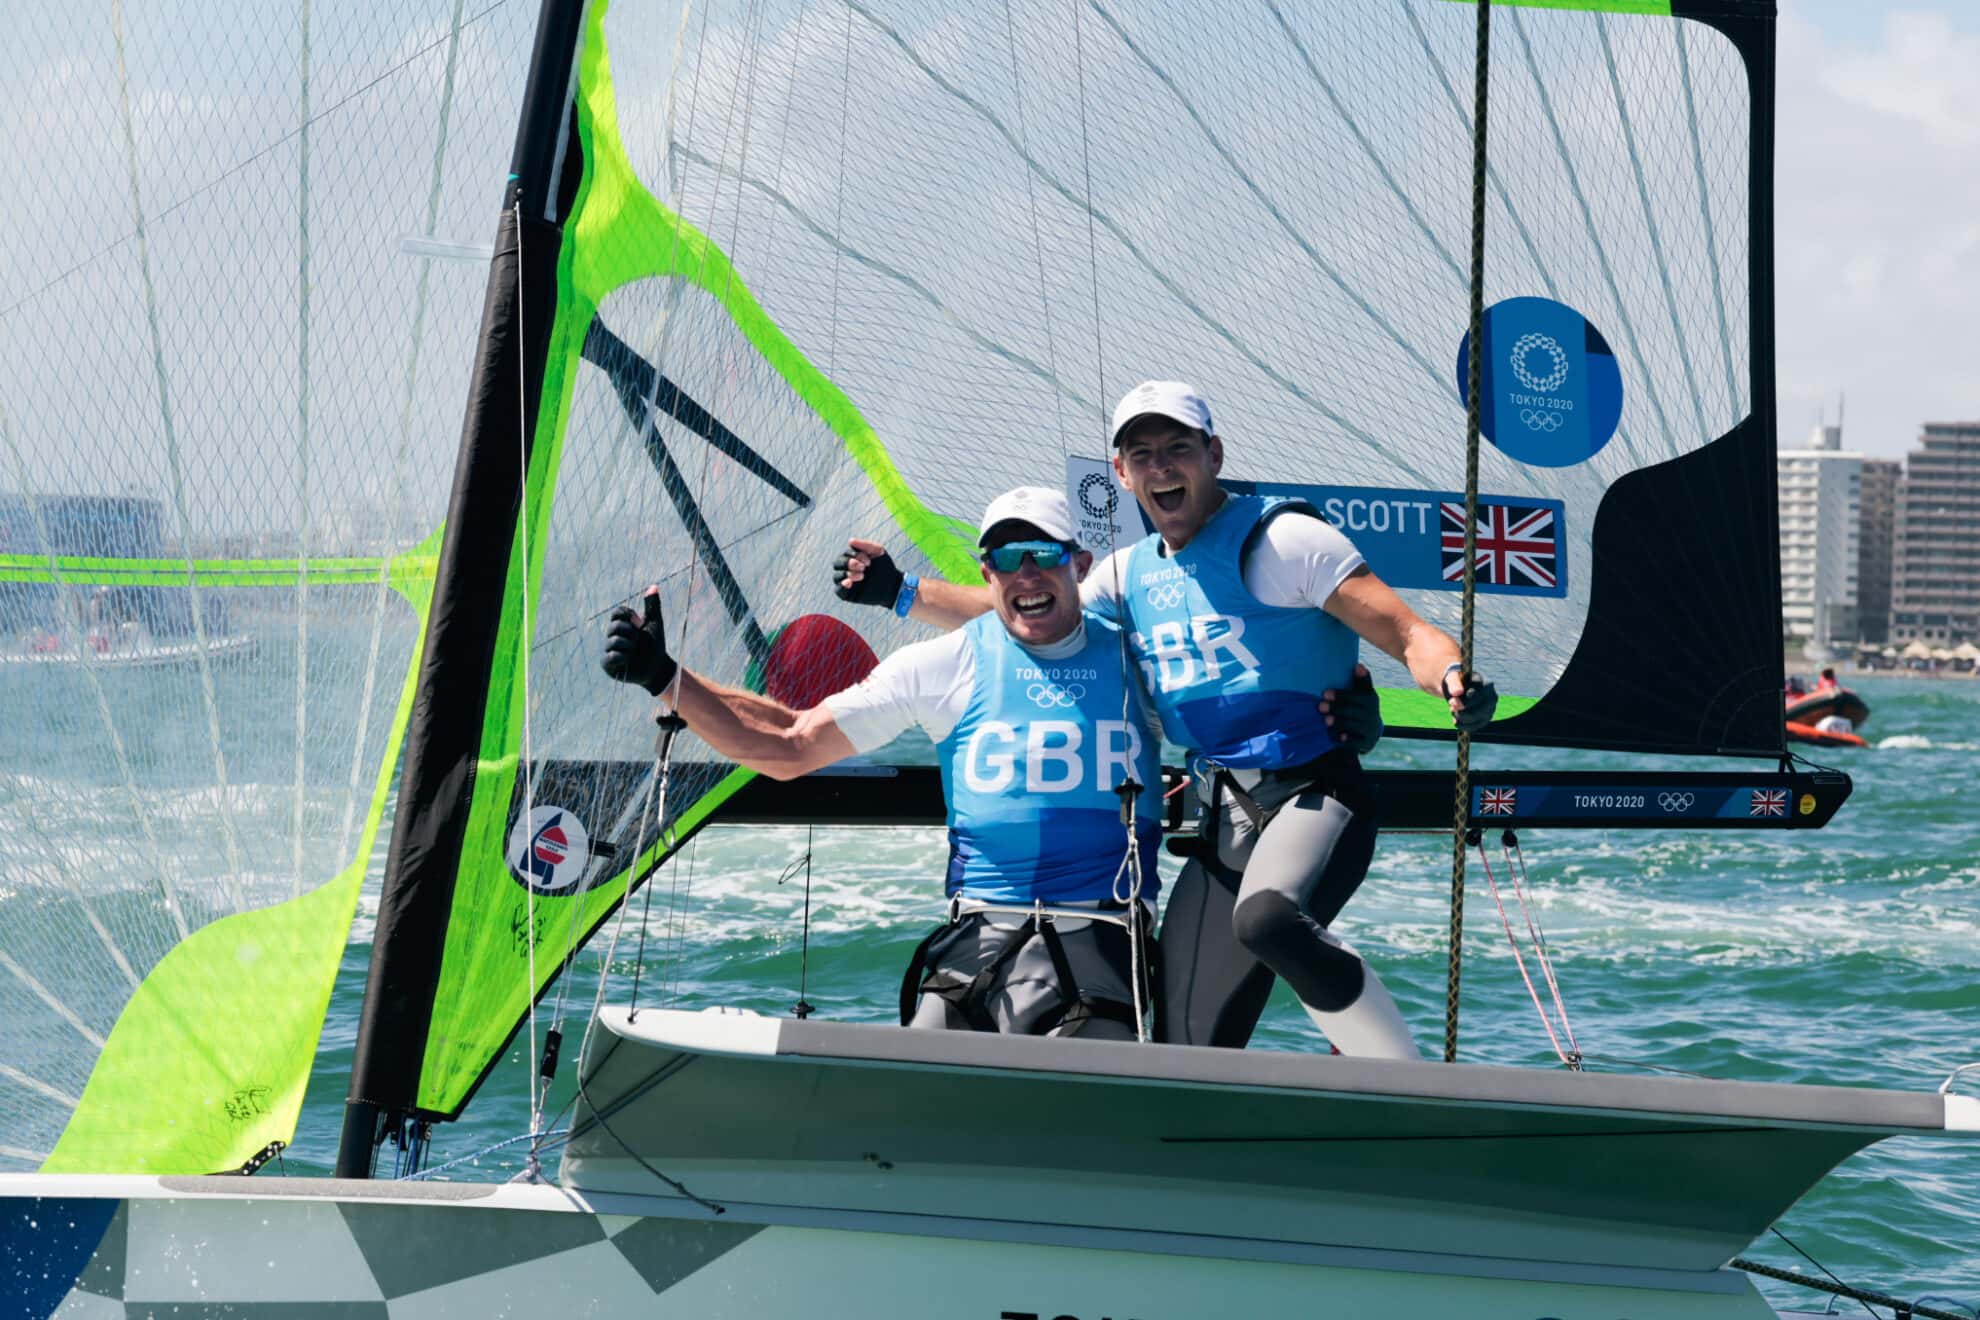 Evening Report: Gold Medals for Italy and Brazil and Two for Great Britain at the Tokyo 2020 Olympic Sailing Competition